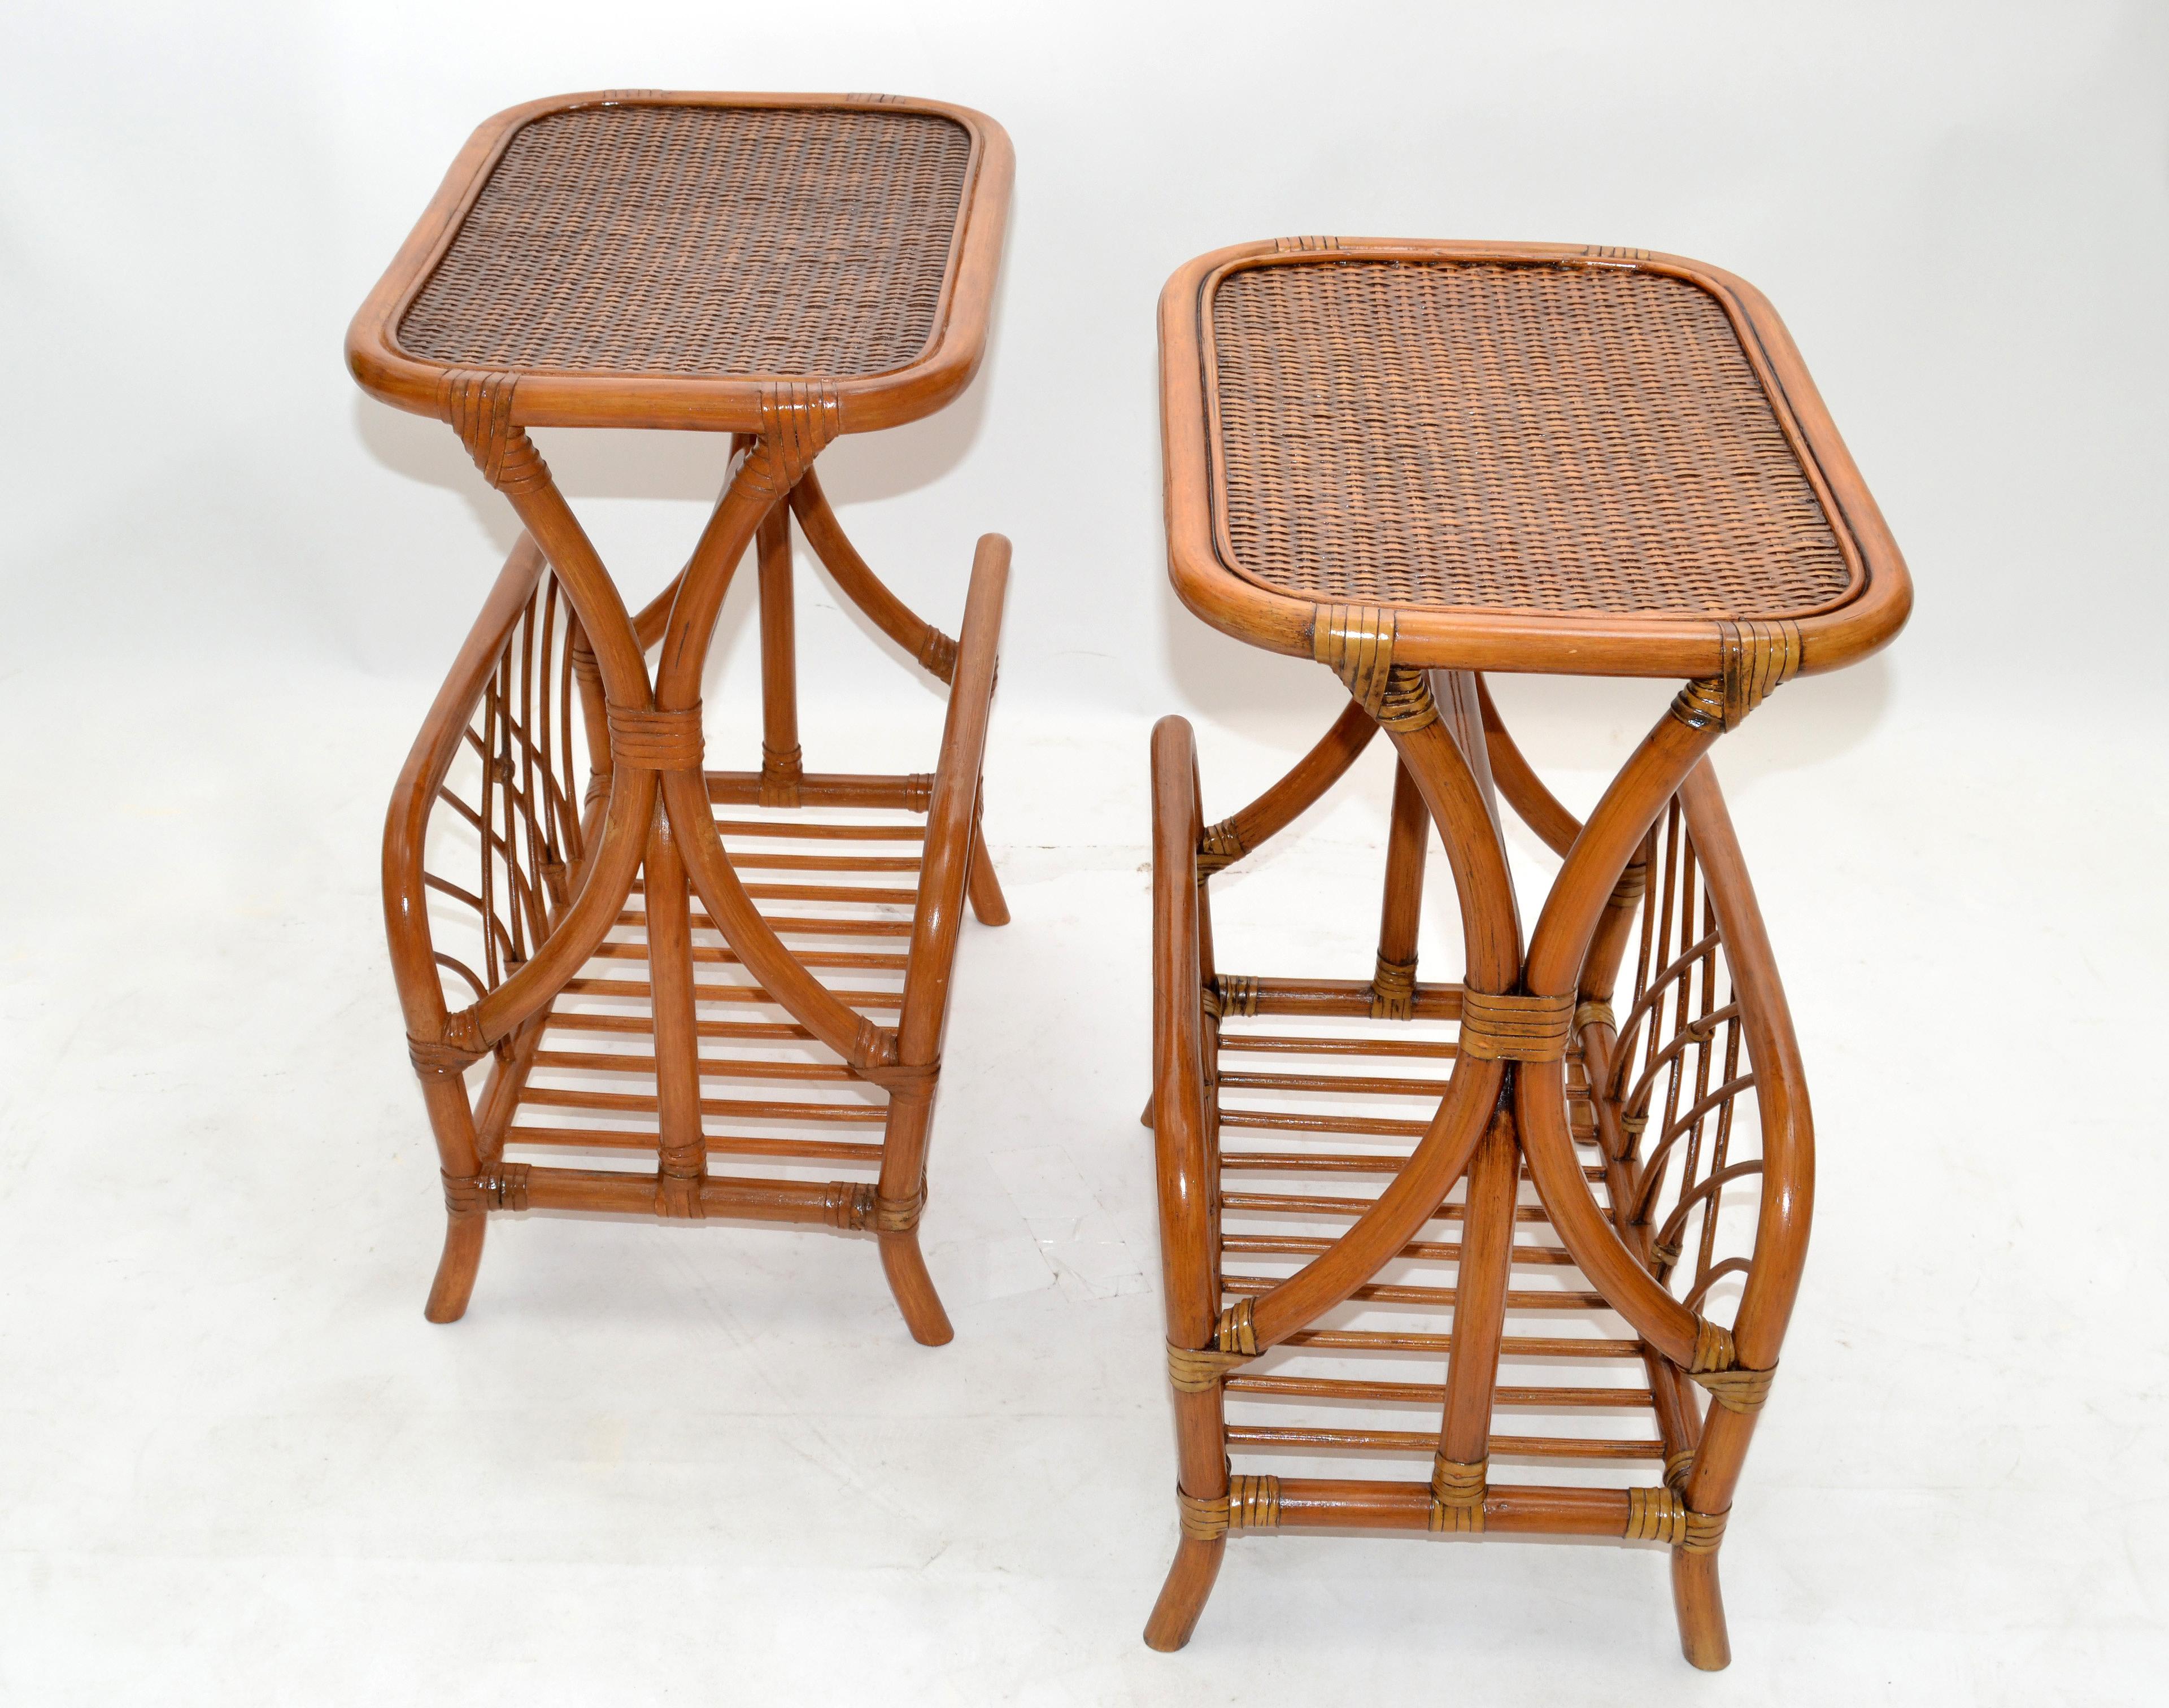 Marked Bamboo & Wicker Mid-Century Modern Side, Bedside Tables Night Stands Pair 1